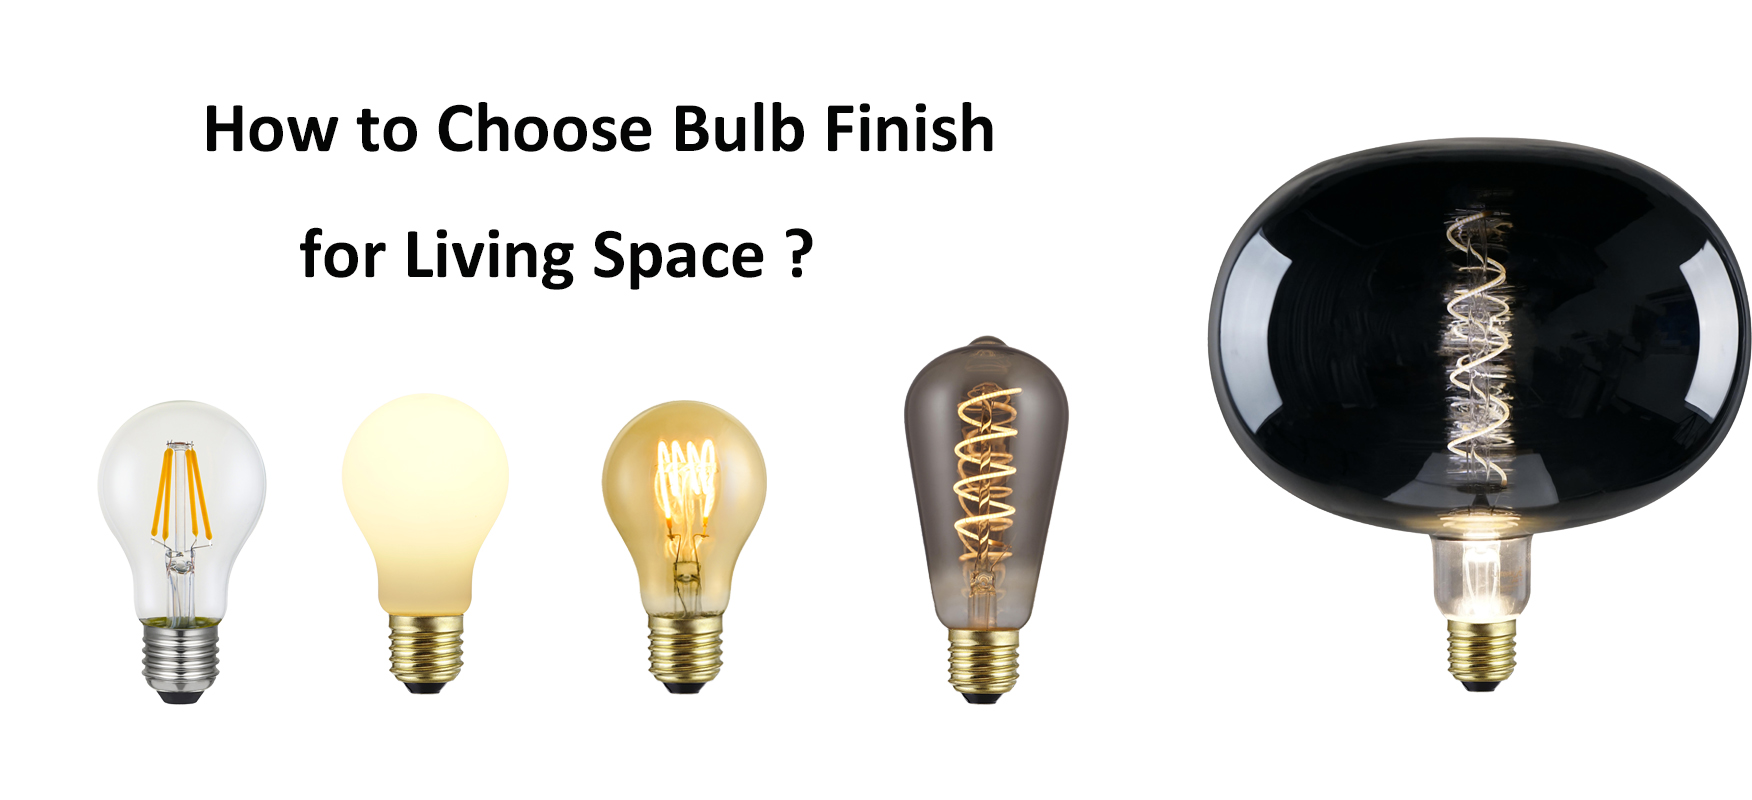 How to Choose Bulb Finish for Different Living Space